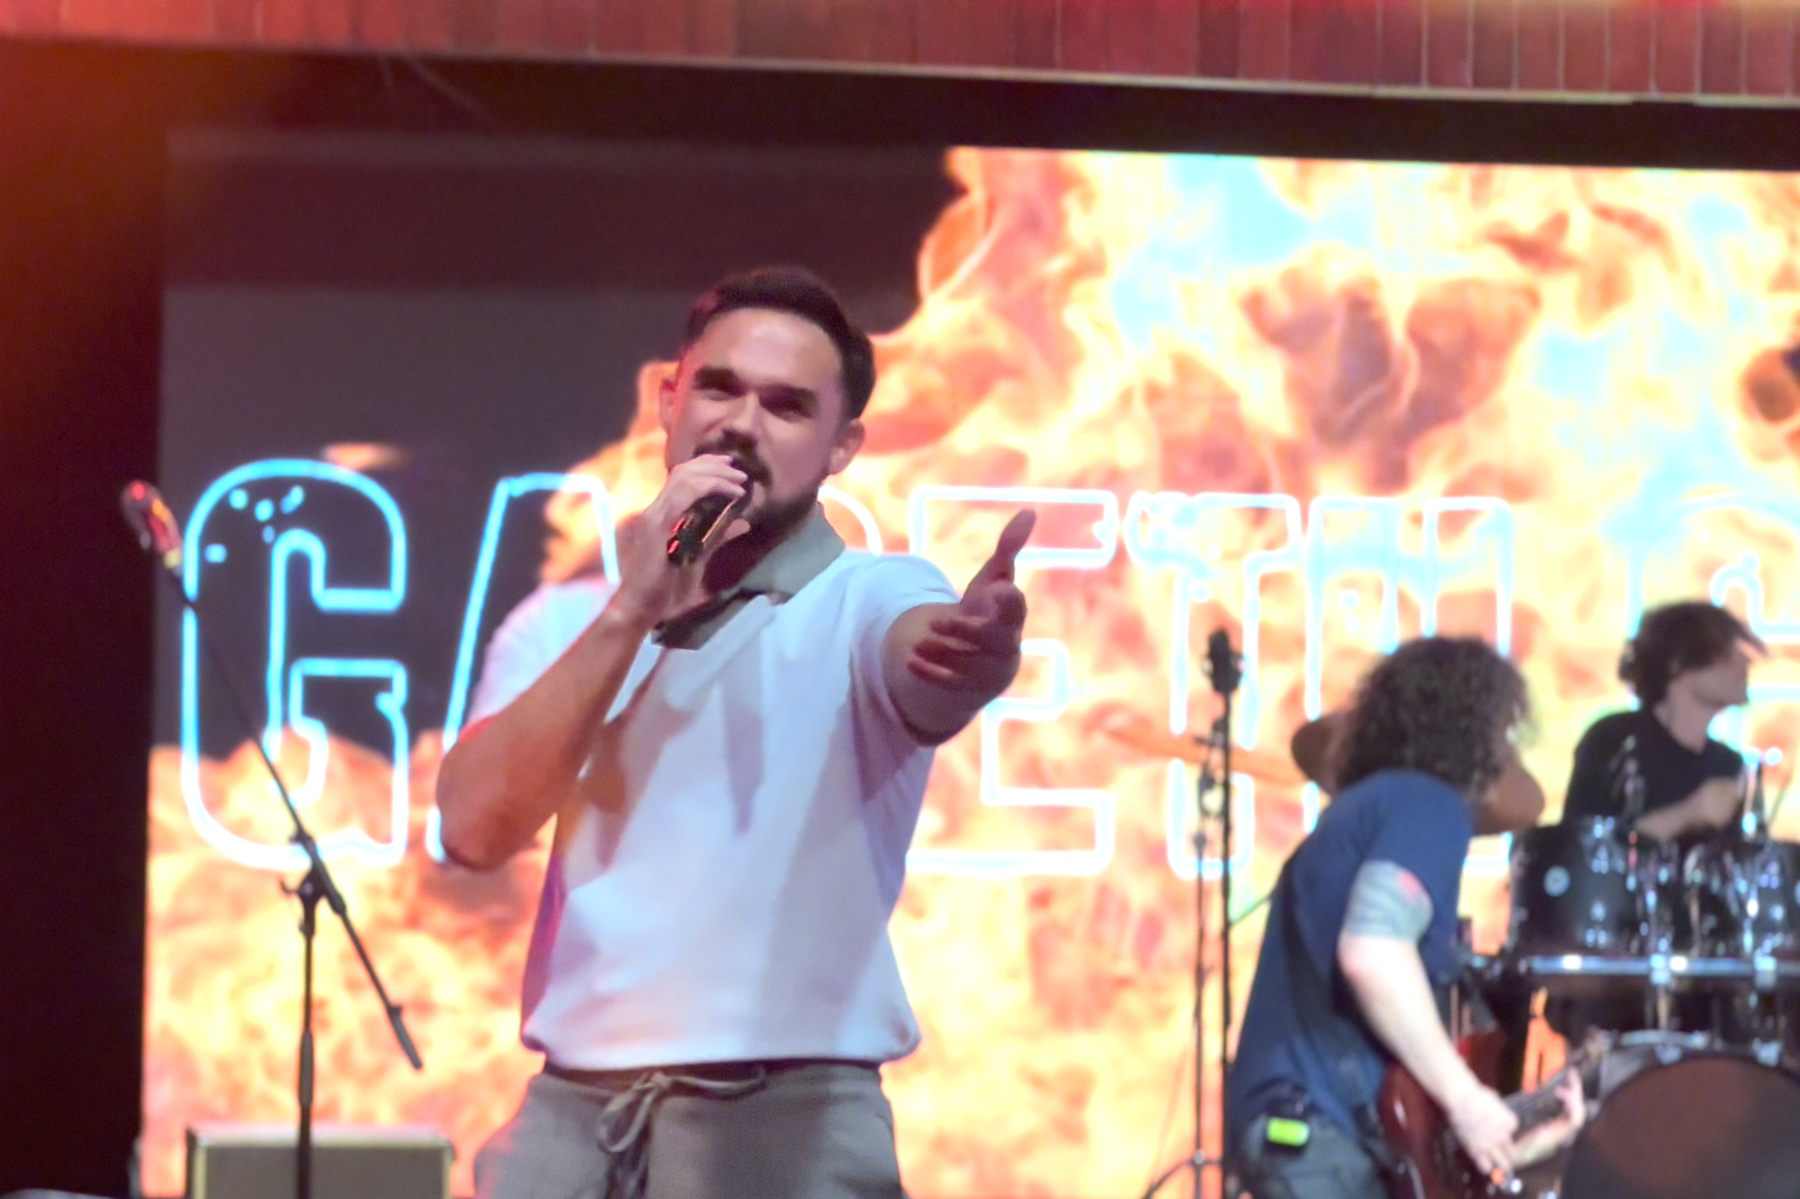 Gareth Gates on stage in front of a flaming screen reaching out to an audience member